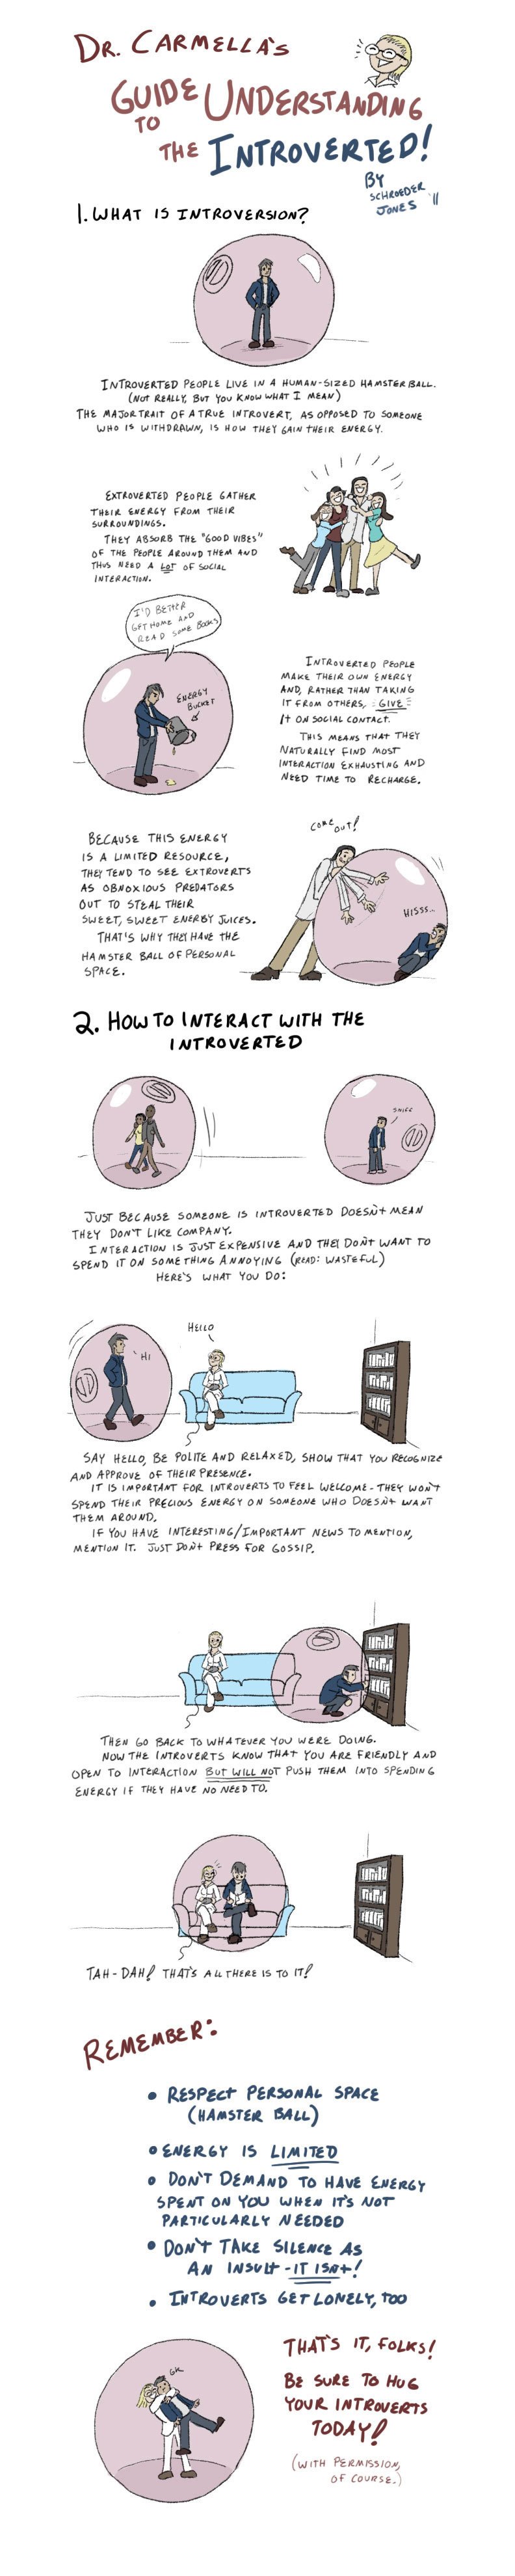 interacting with an introvert infographic